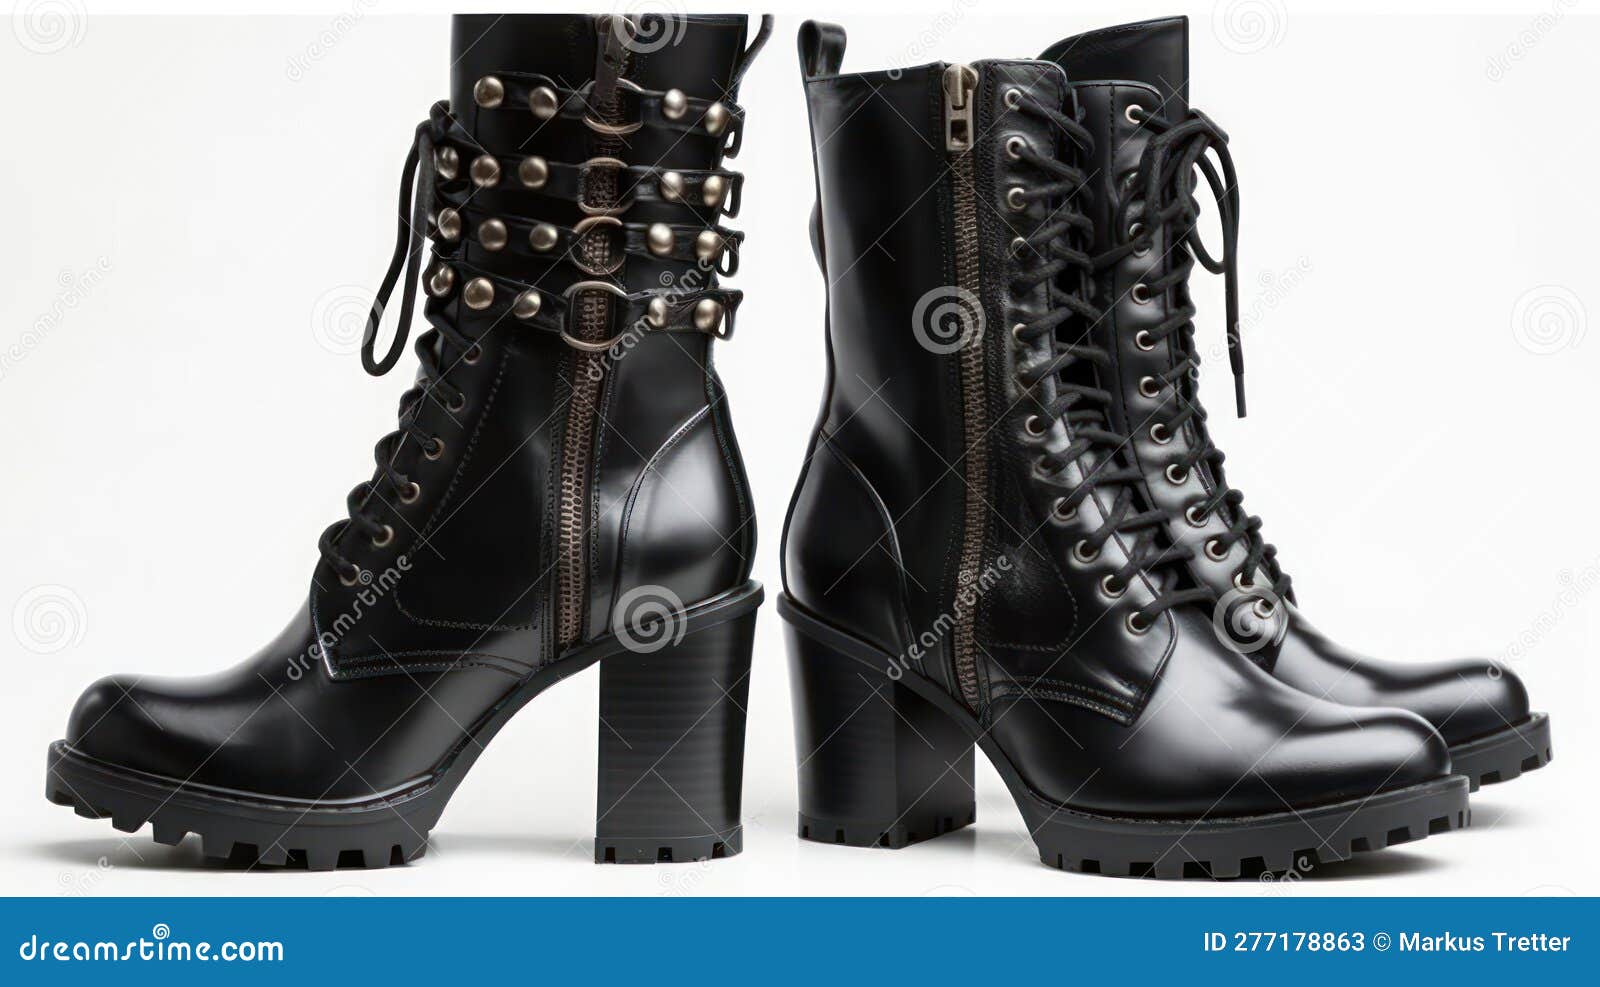 Amazon.com | Susanny Platform Heel Boots Womens Black Sexy High Heels  Harley Steampunk Heeled Combat Boots Shoes Lace UP Short Ankle Booties 7 |  Ankle & Bootie